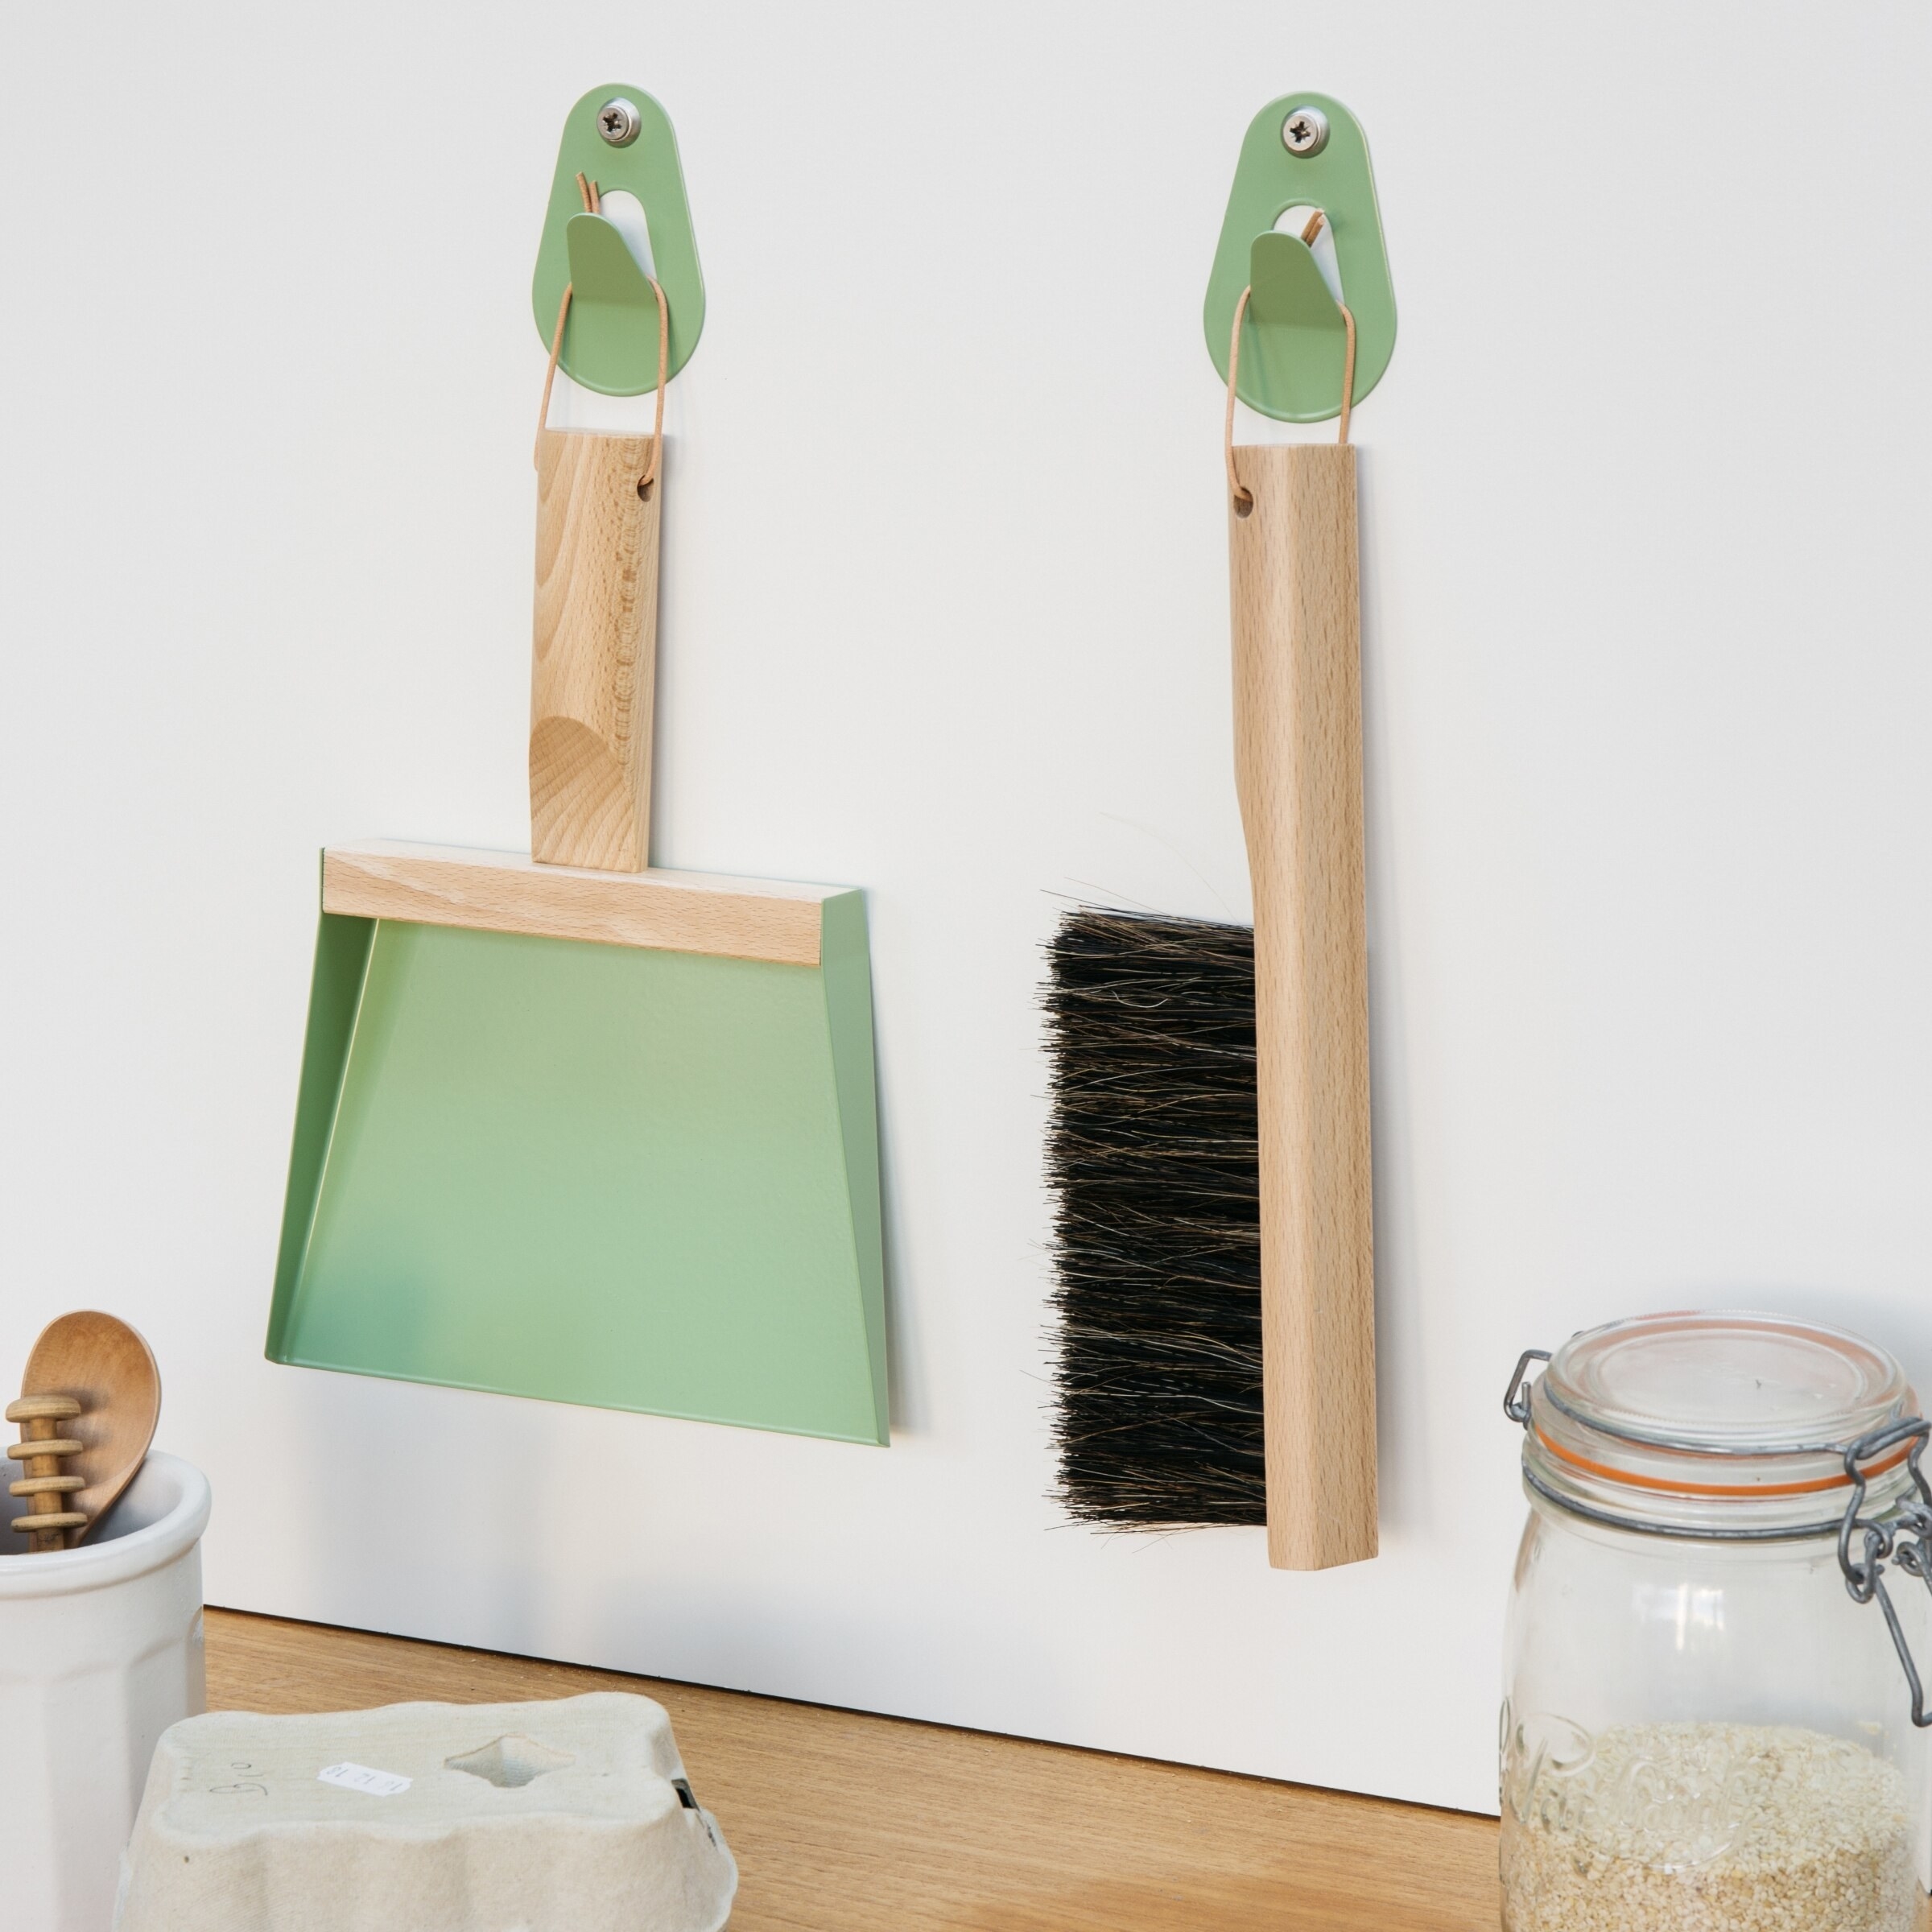 the dustpan and broom hung on matching hooks